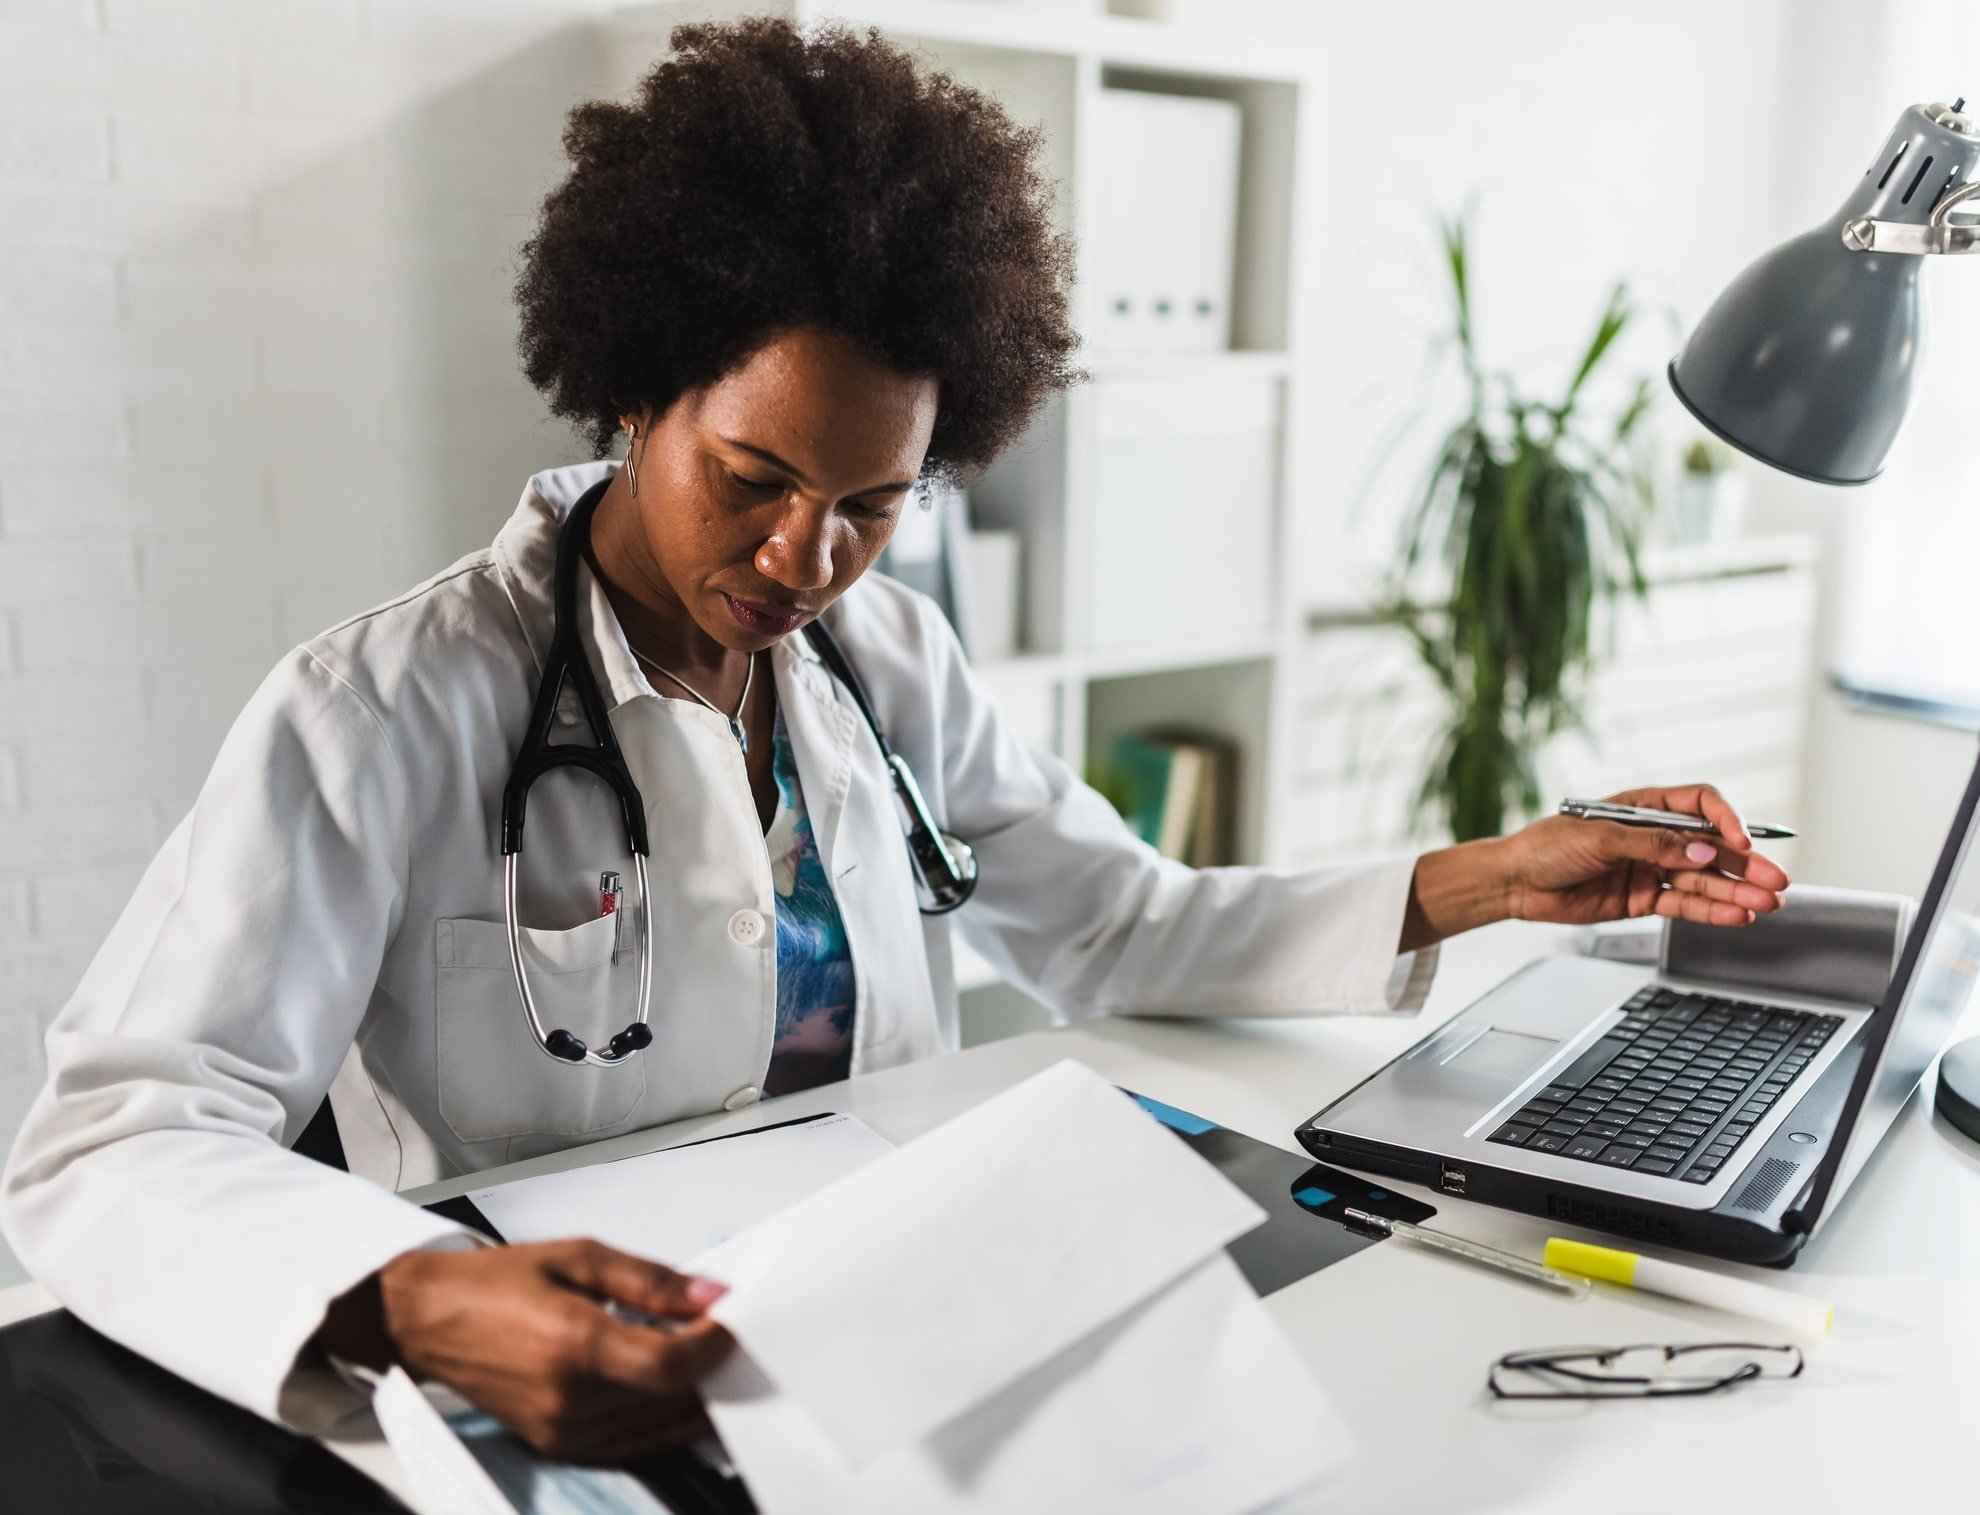 How to Prevent Physician Burnout at Your Practice